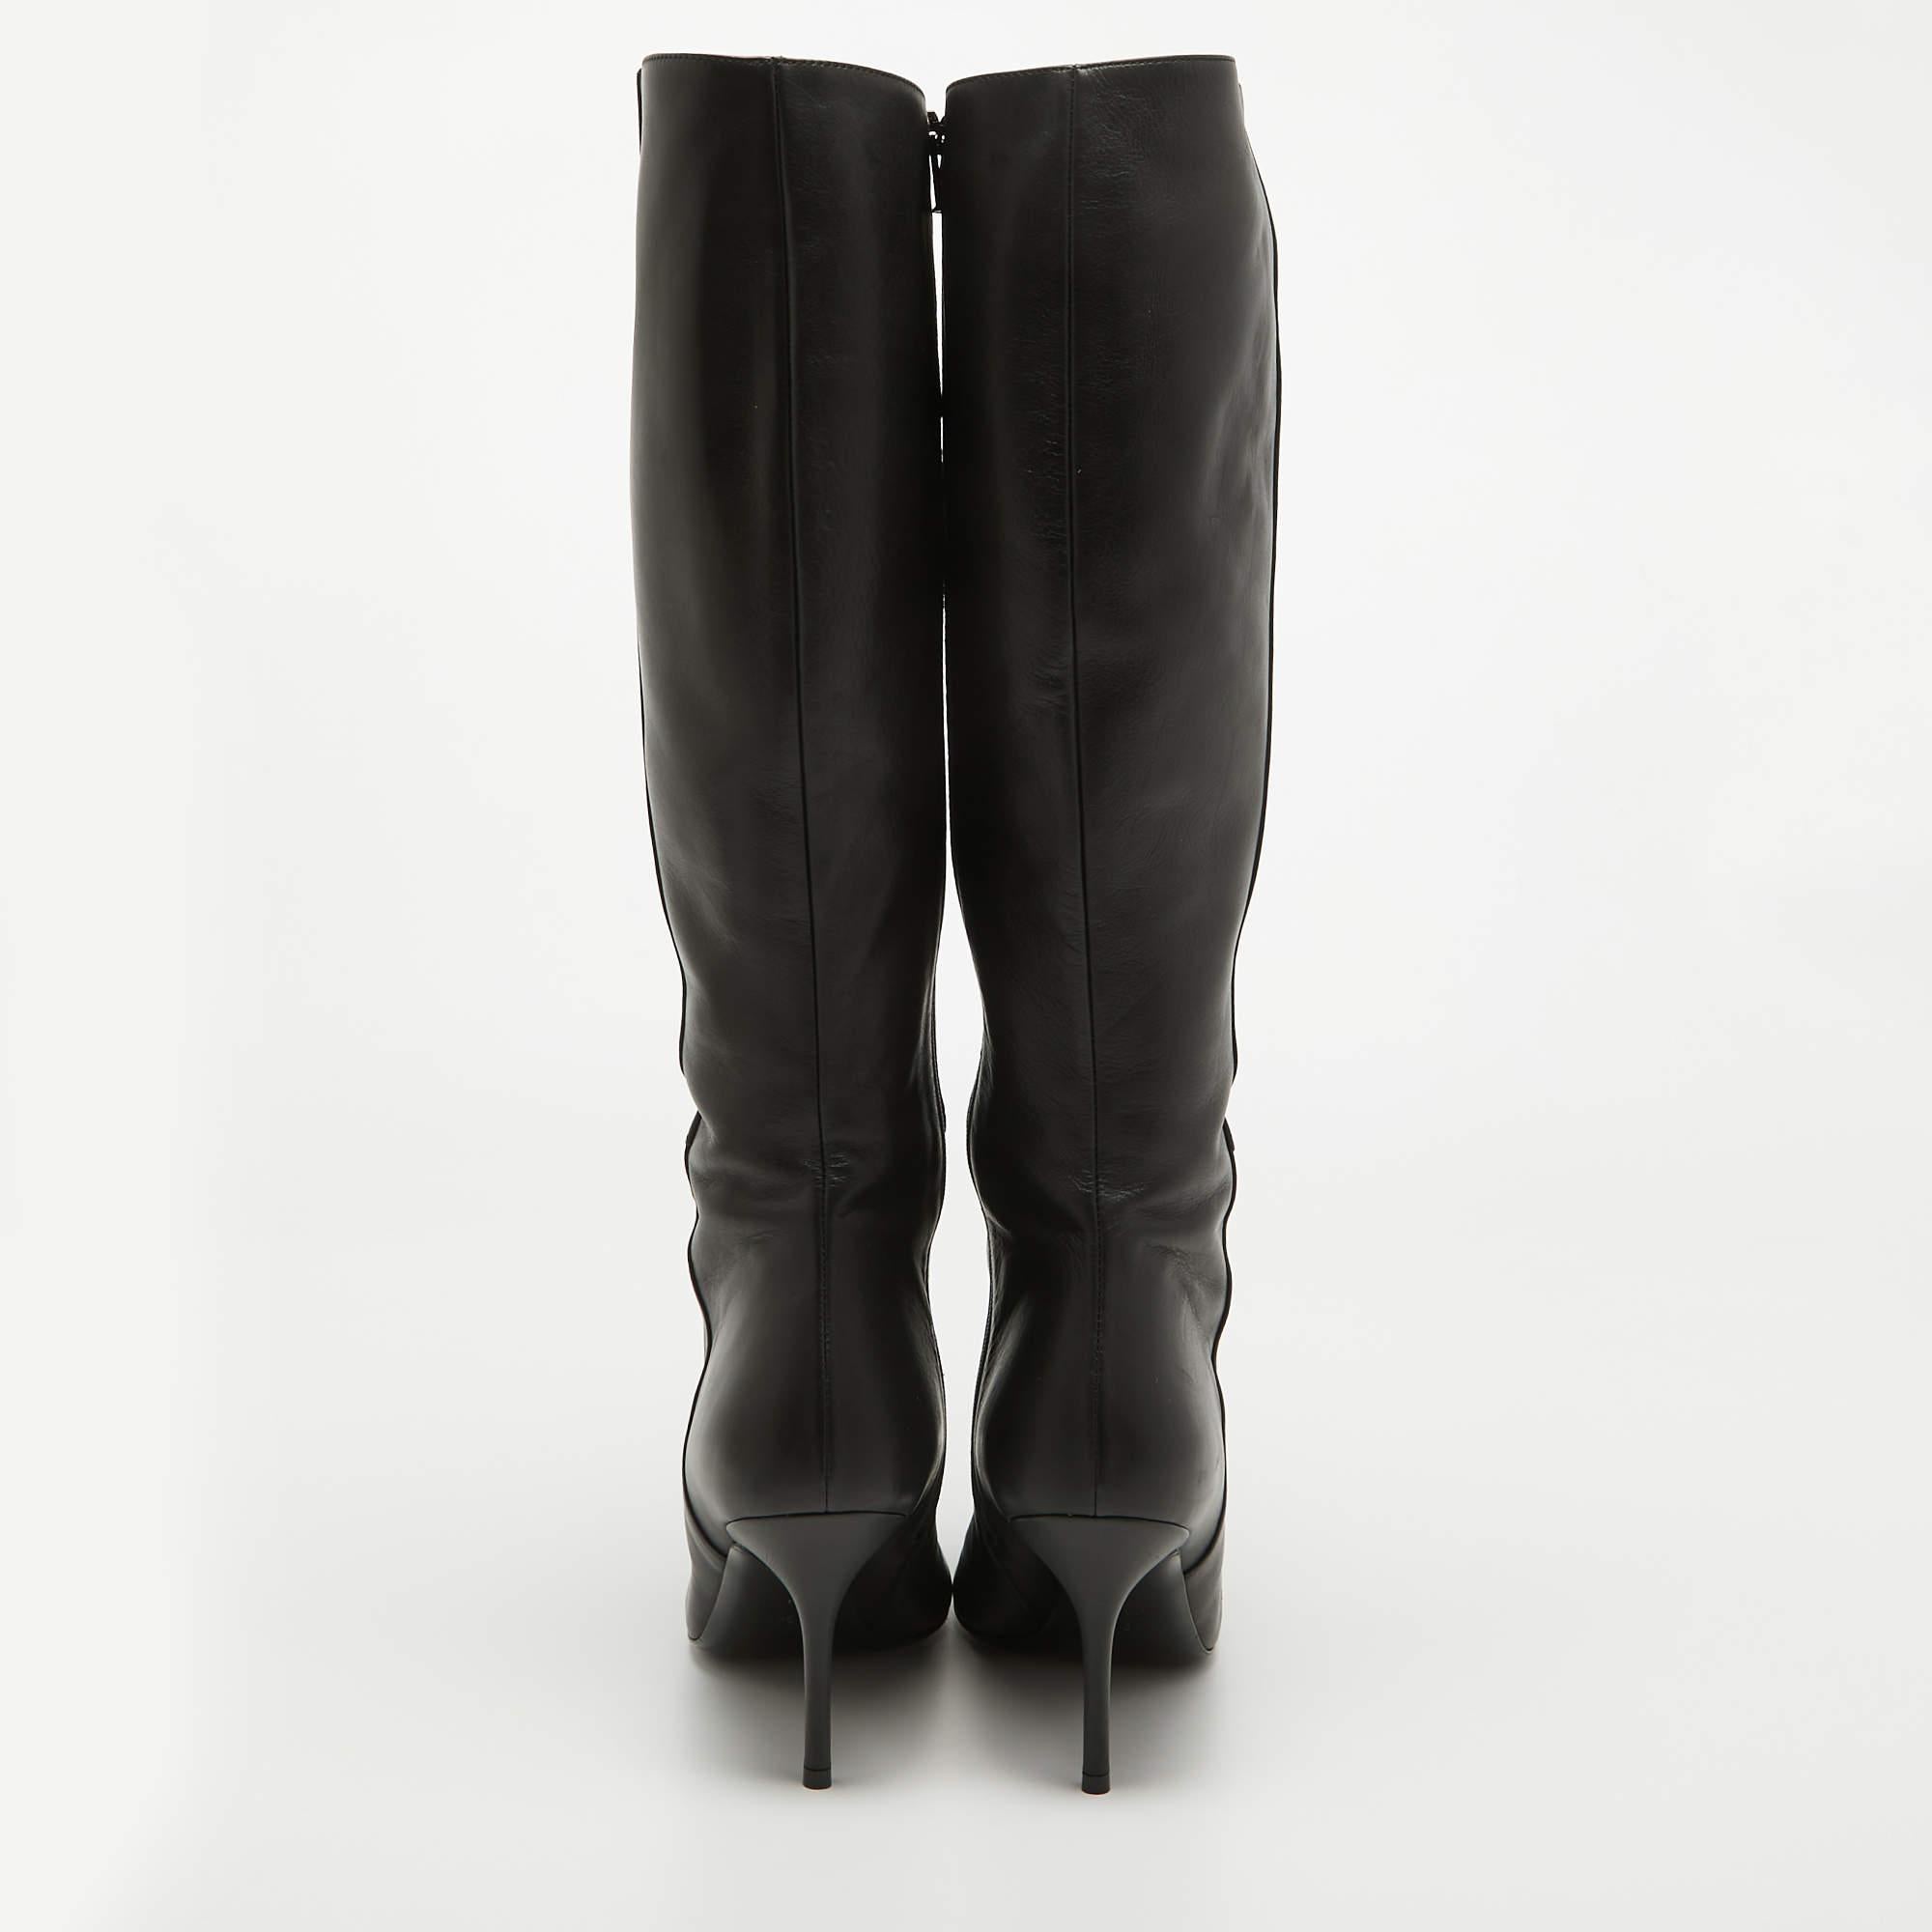 Women's Gucci Black Leather Knee Length Boots Size 40